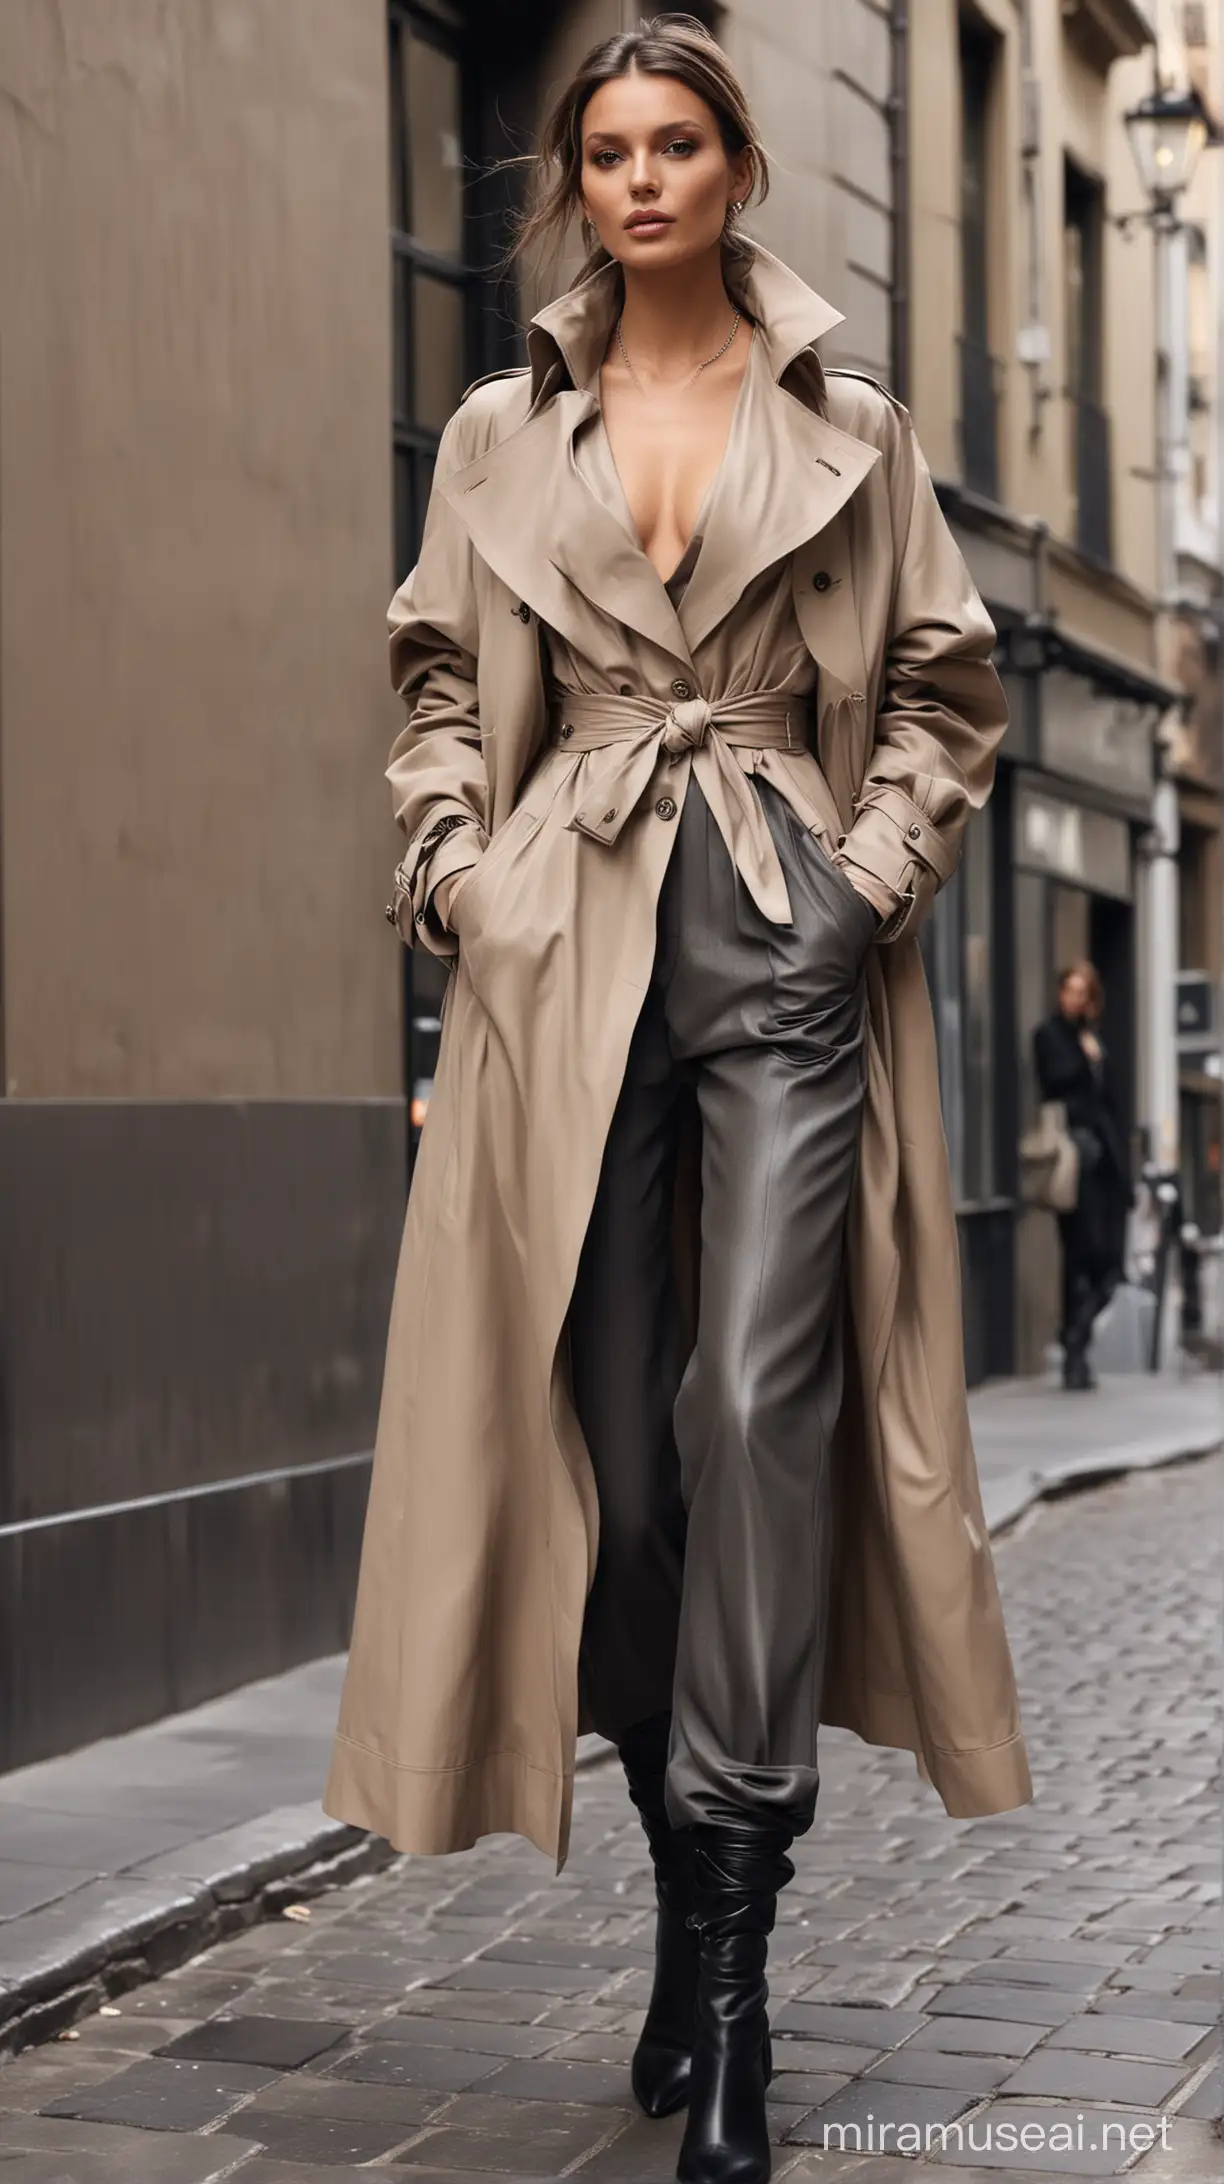 Glamorous Supermodel in Taupe Trench Coat and Leather Pants Strides Through Urban Street